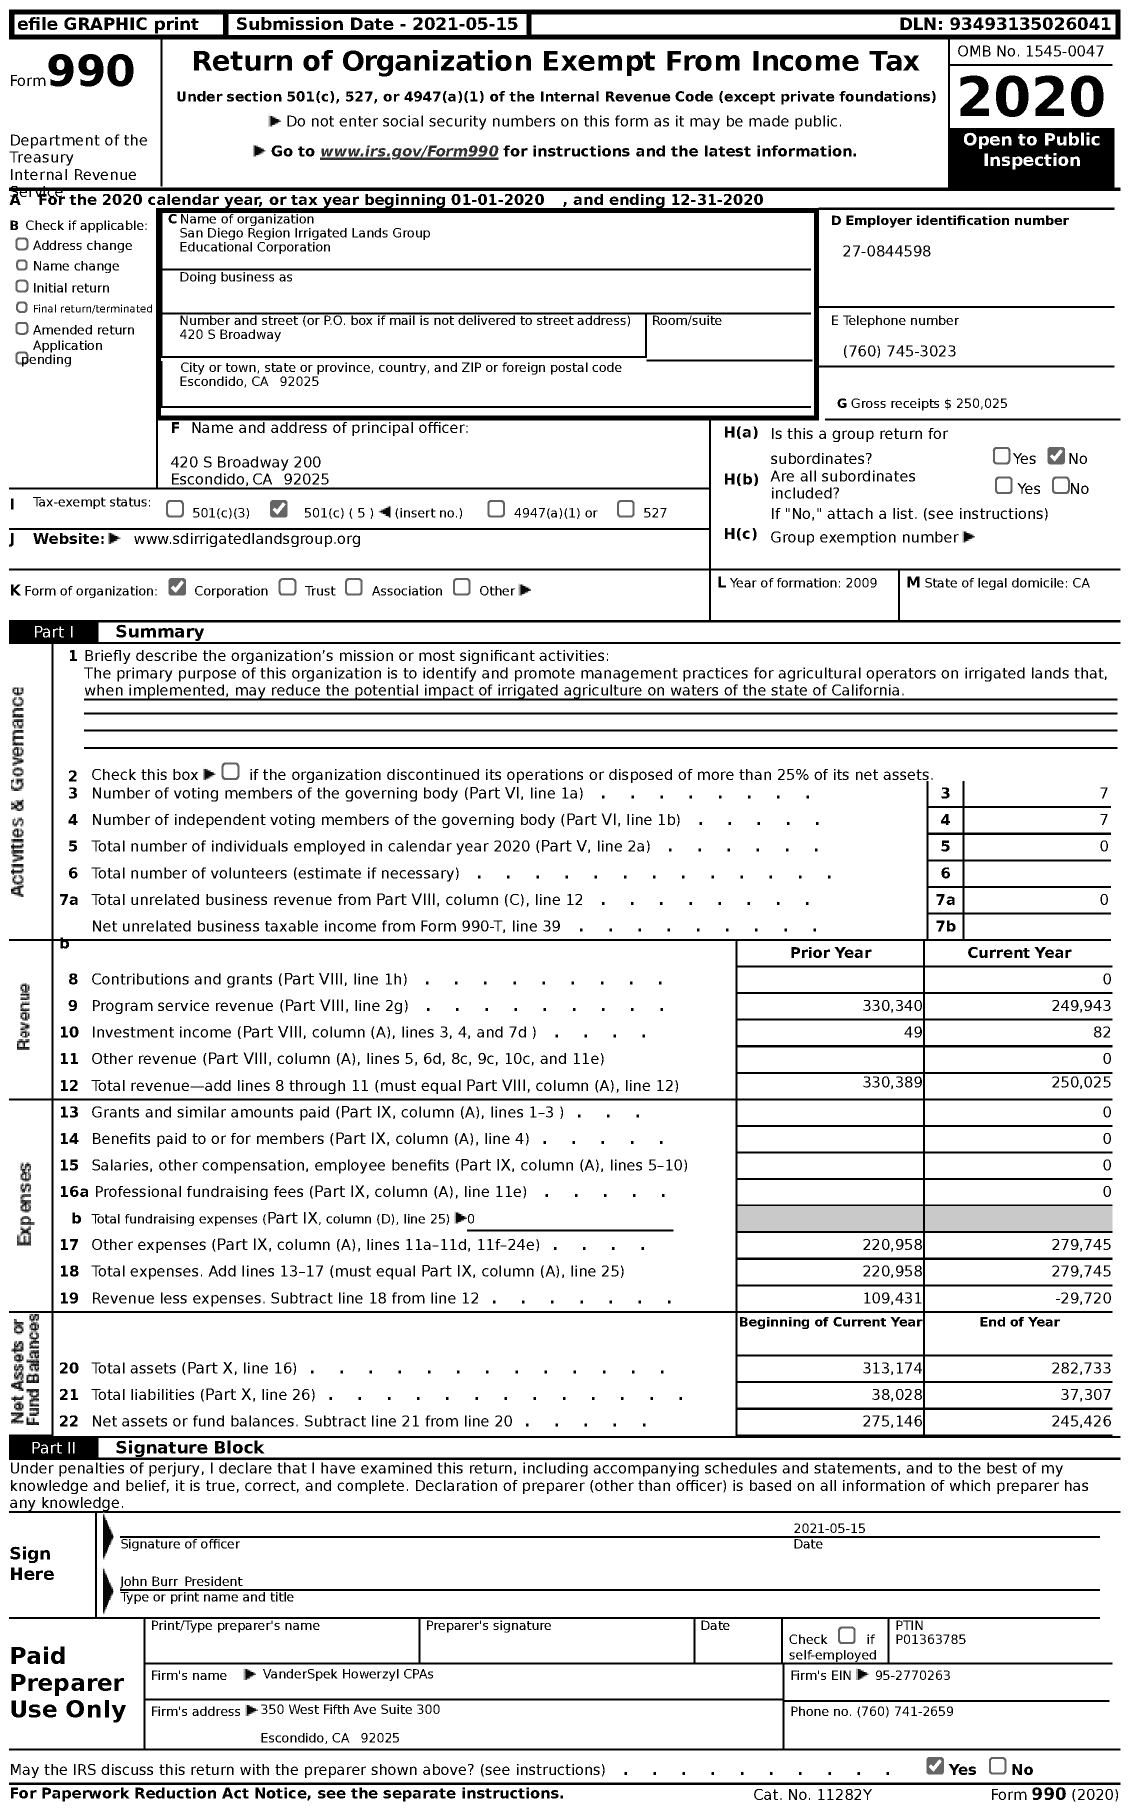 Image of first page of 2020 Form 990 for San Diego Region Irrigated Lands Group Educational Corporation